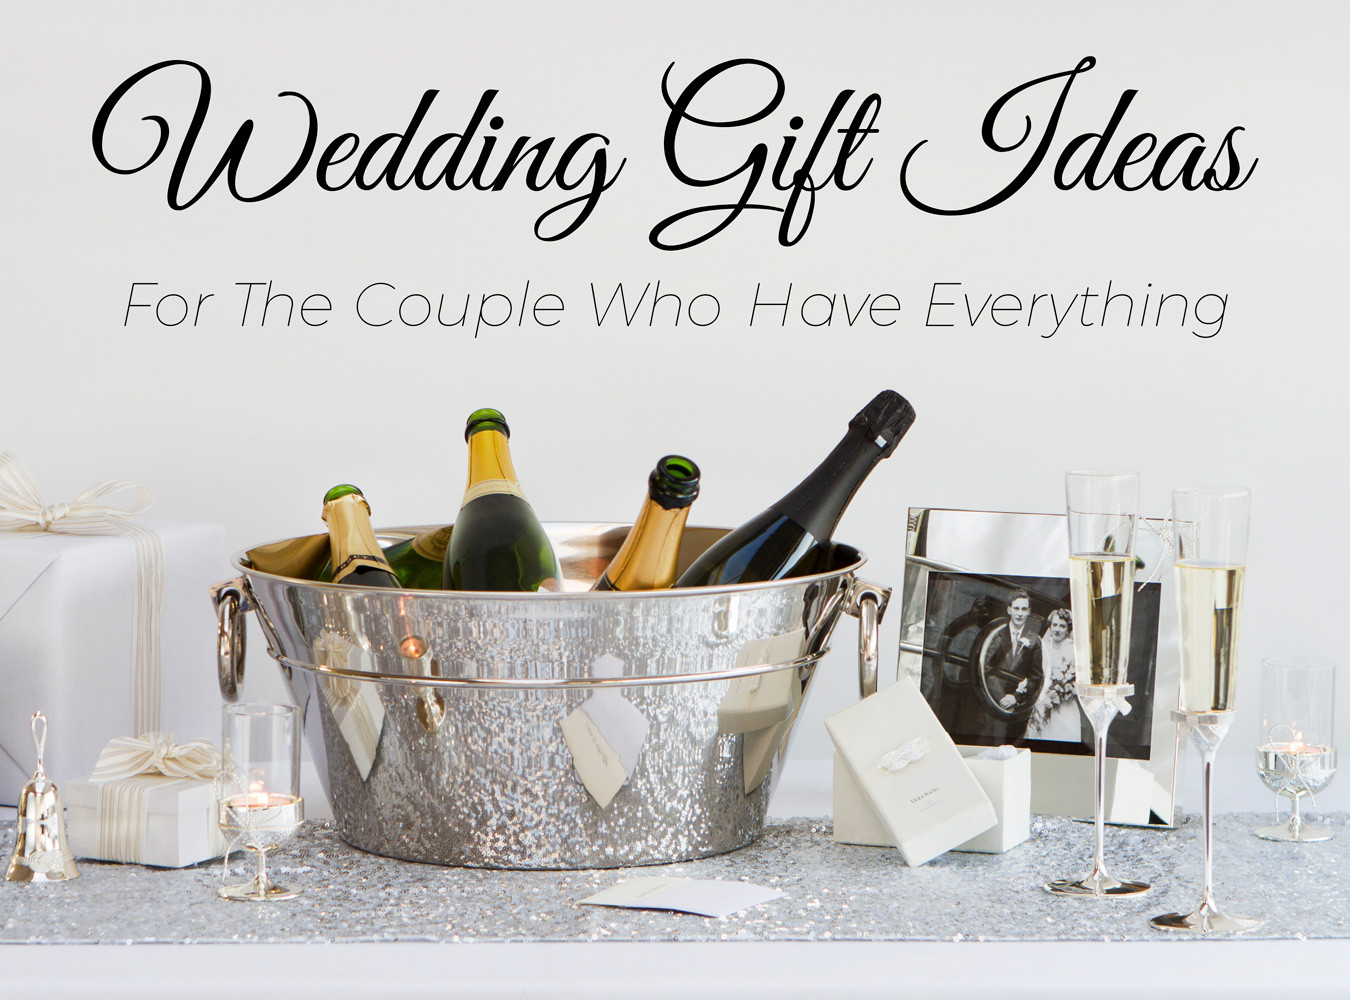 Gift Ideas For Couples That Have Everything
 Gift Ideas For Couples Who Have Everything